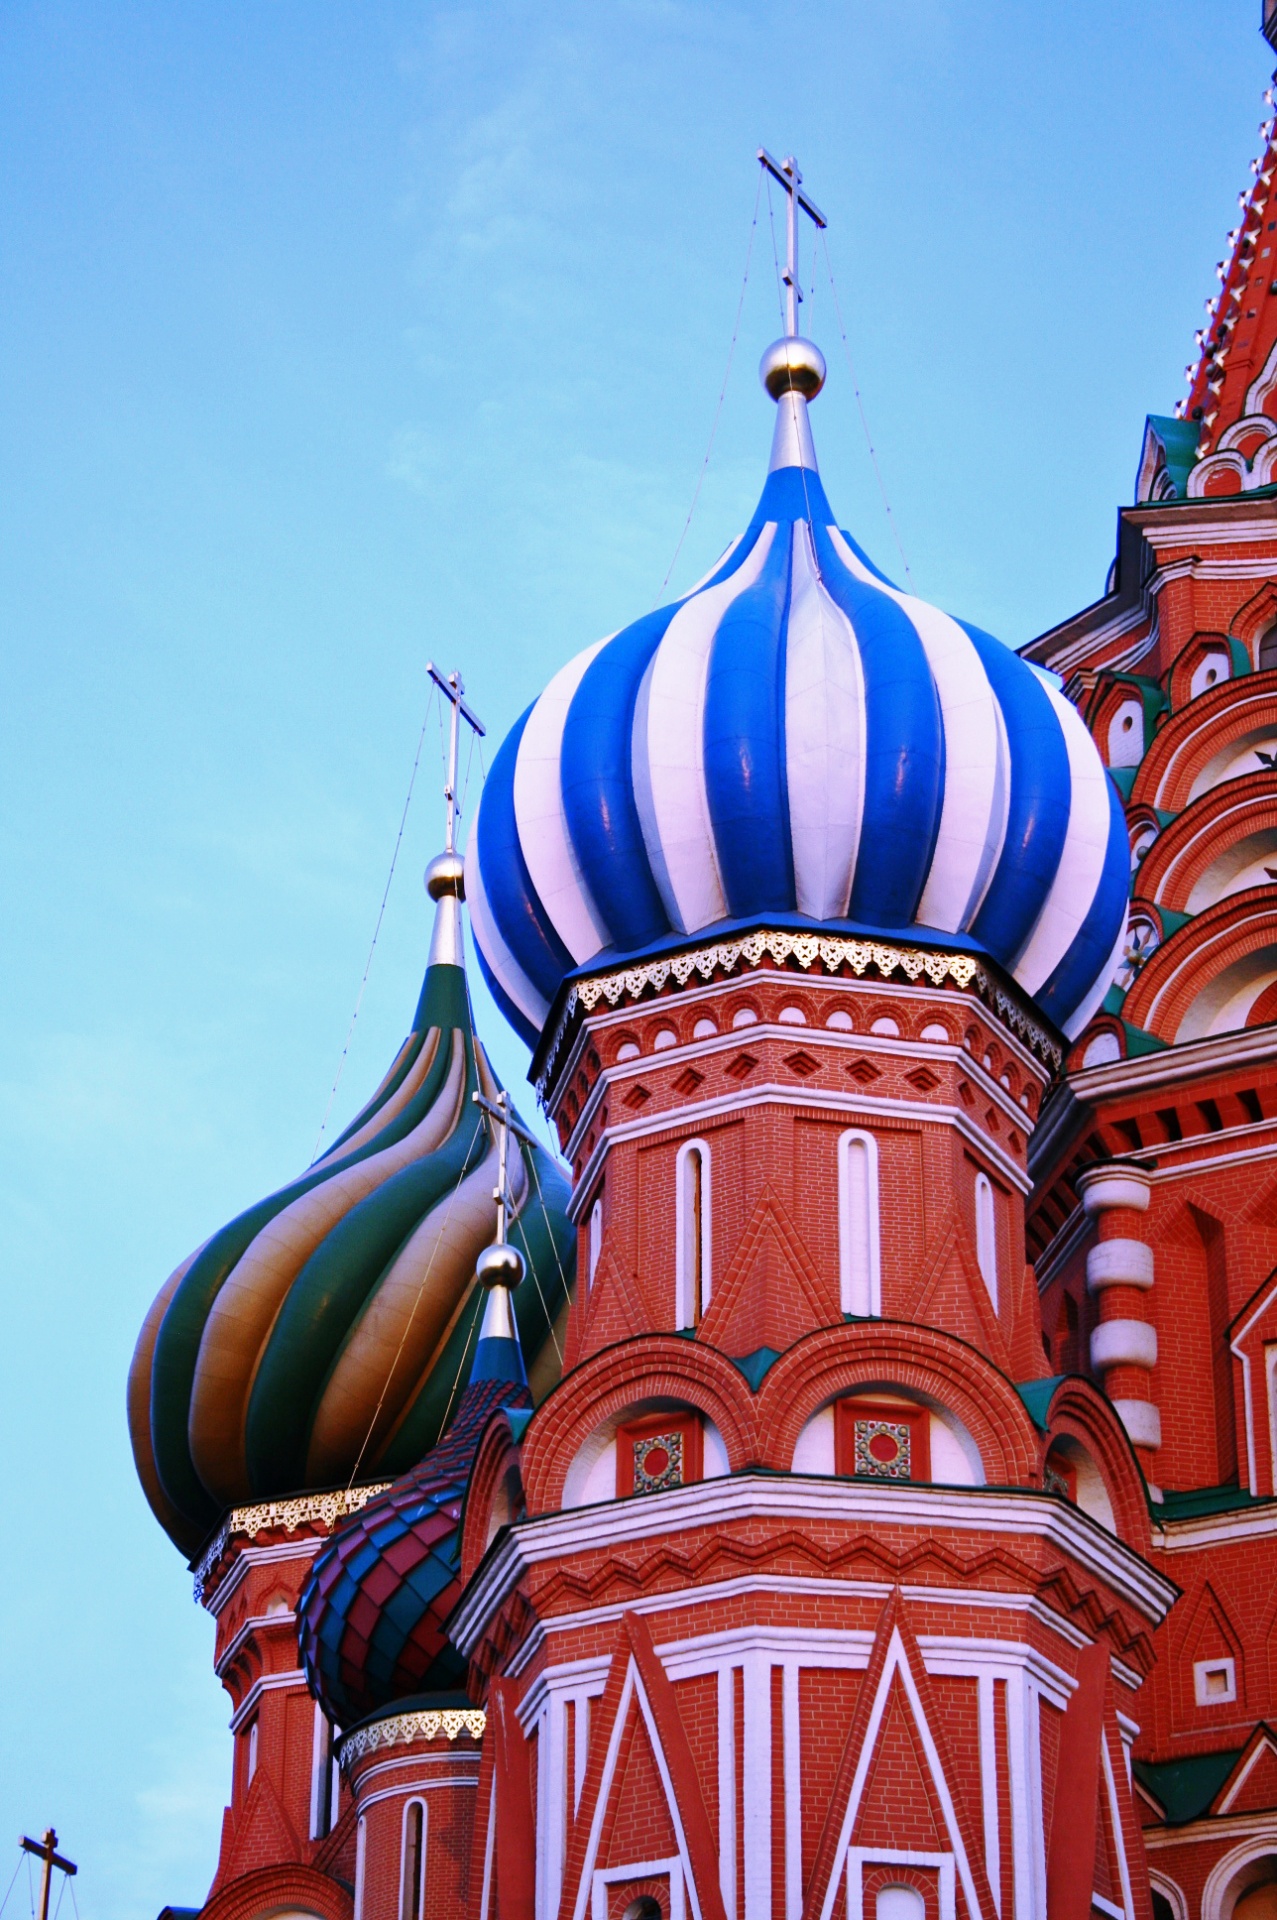 blue and white decorative cupola on the st basil's cathedral